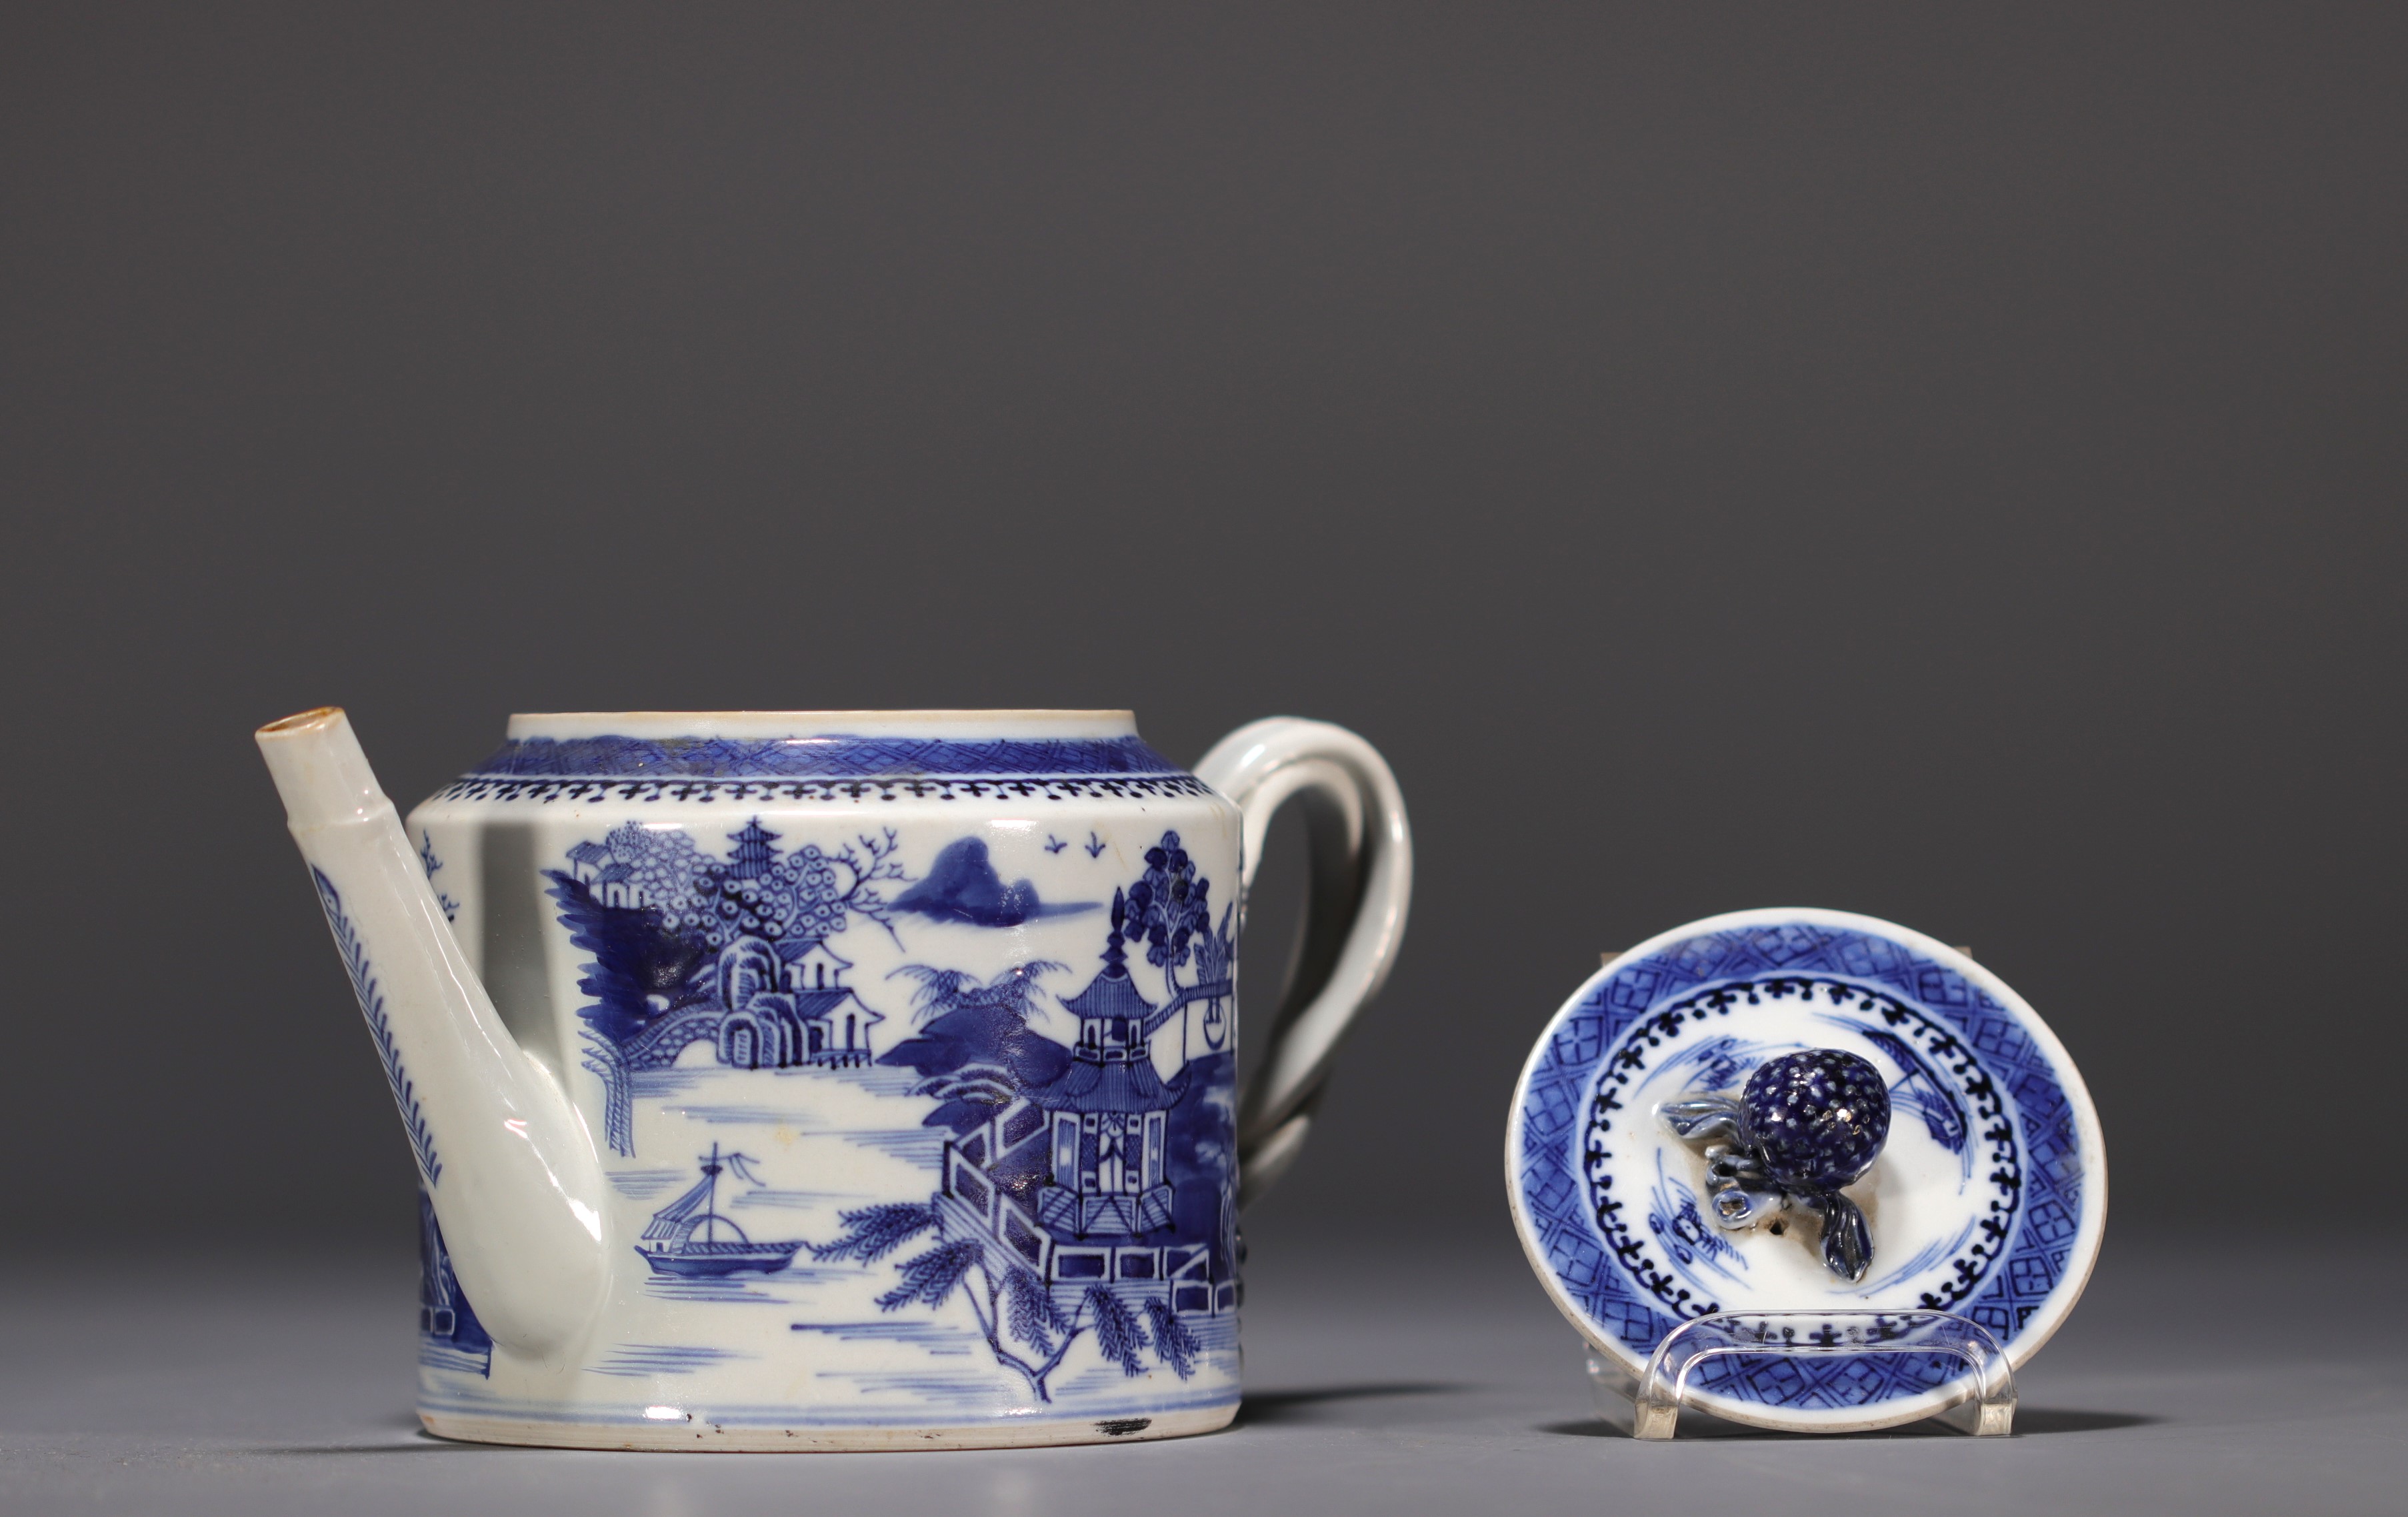 China - A white and blue porcelain teapot decorated with landscapes and a junk, 18th century. - Image 7 of 8